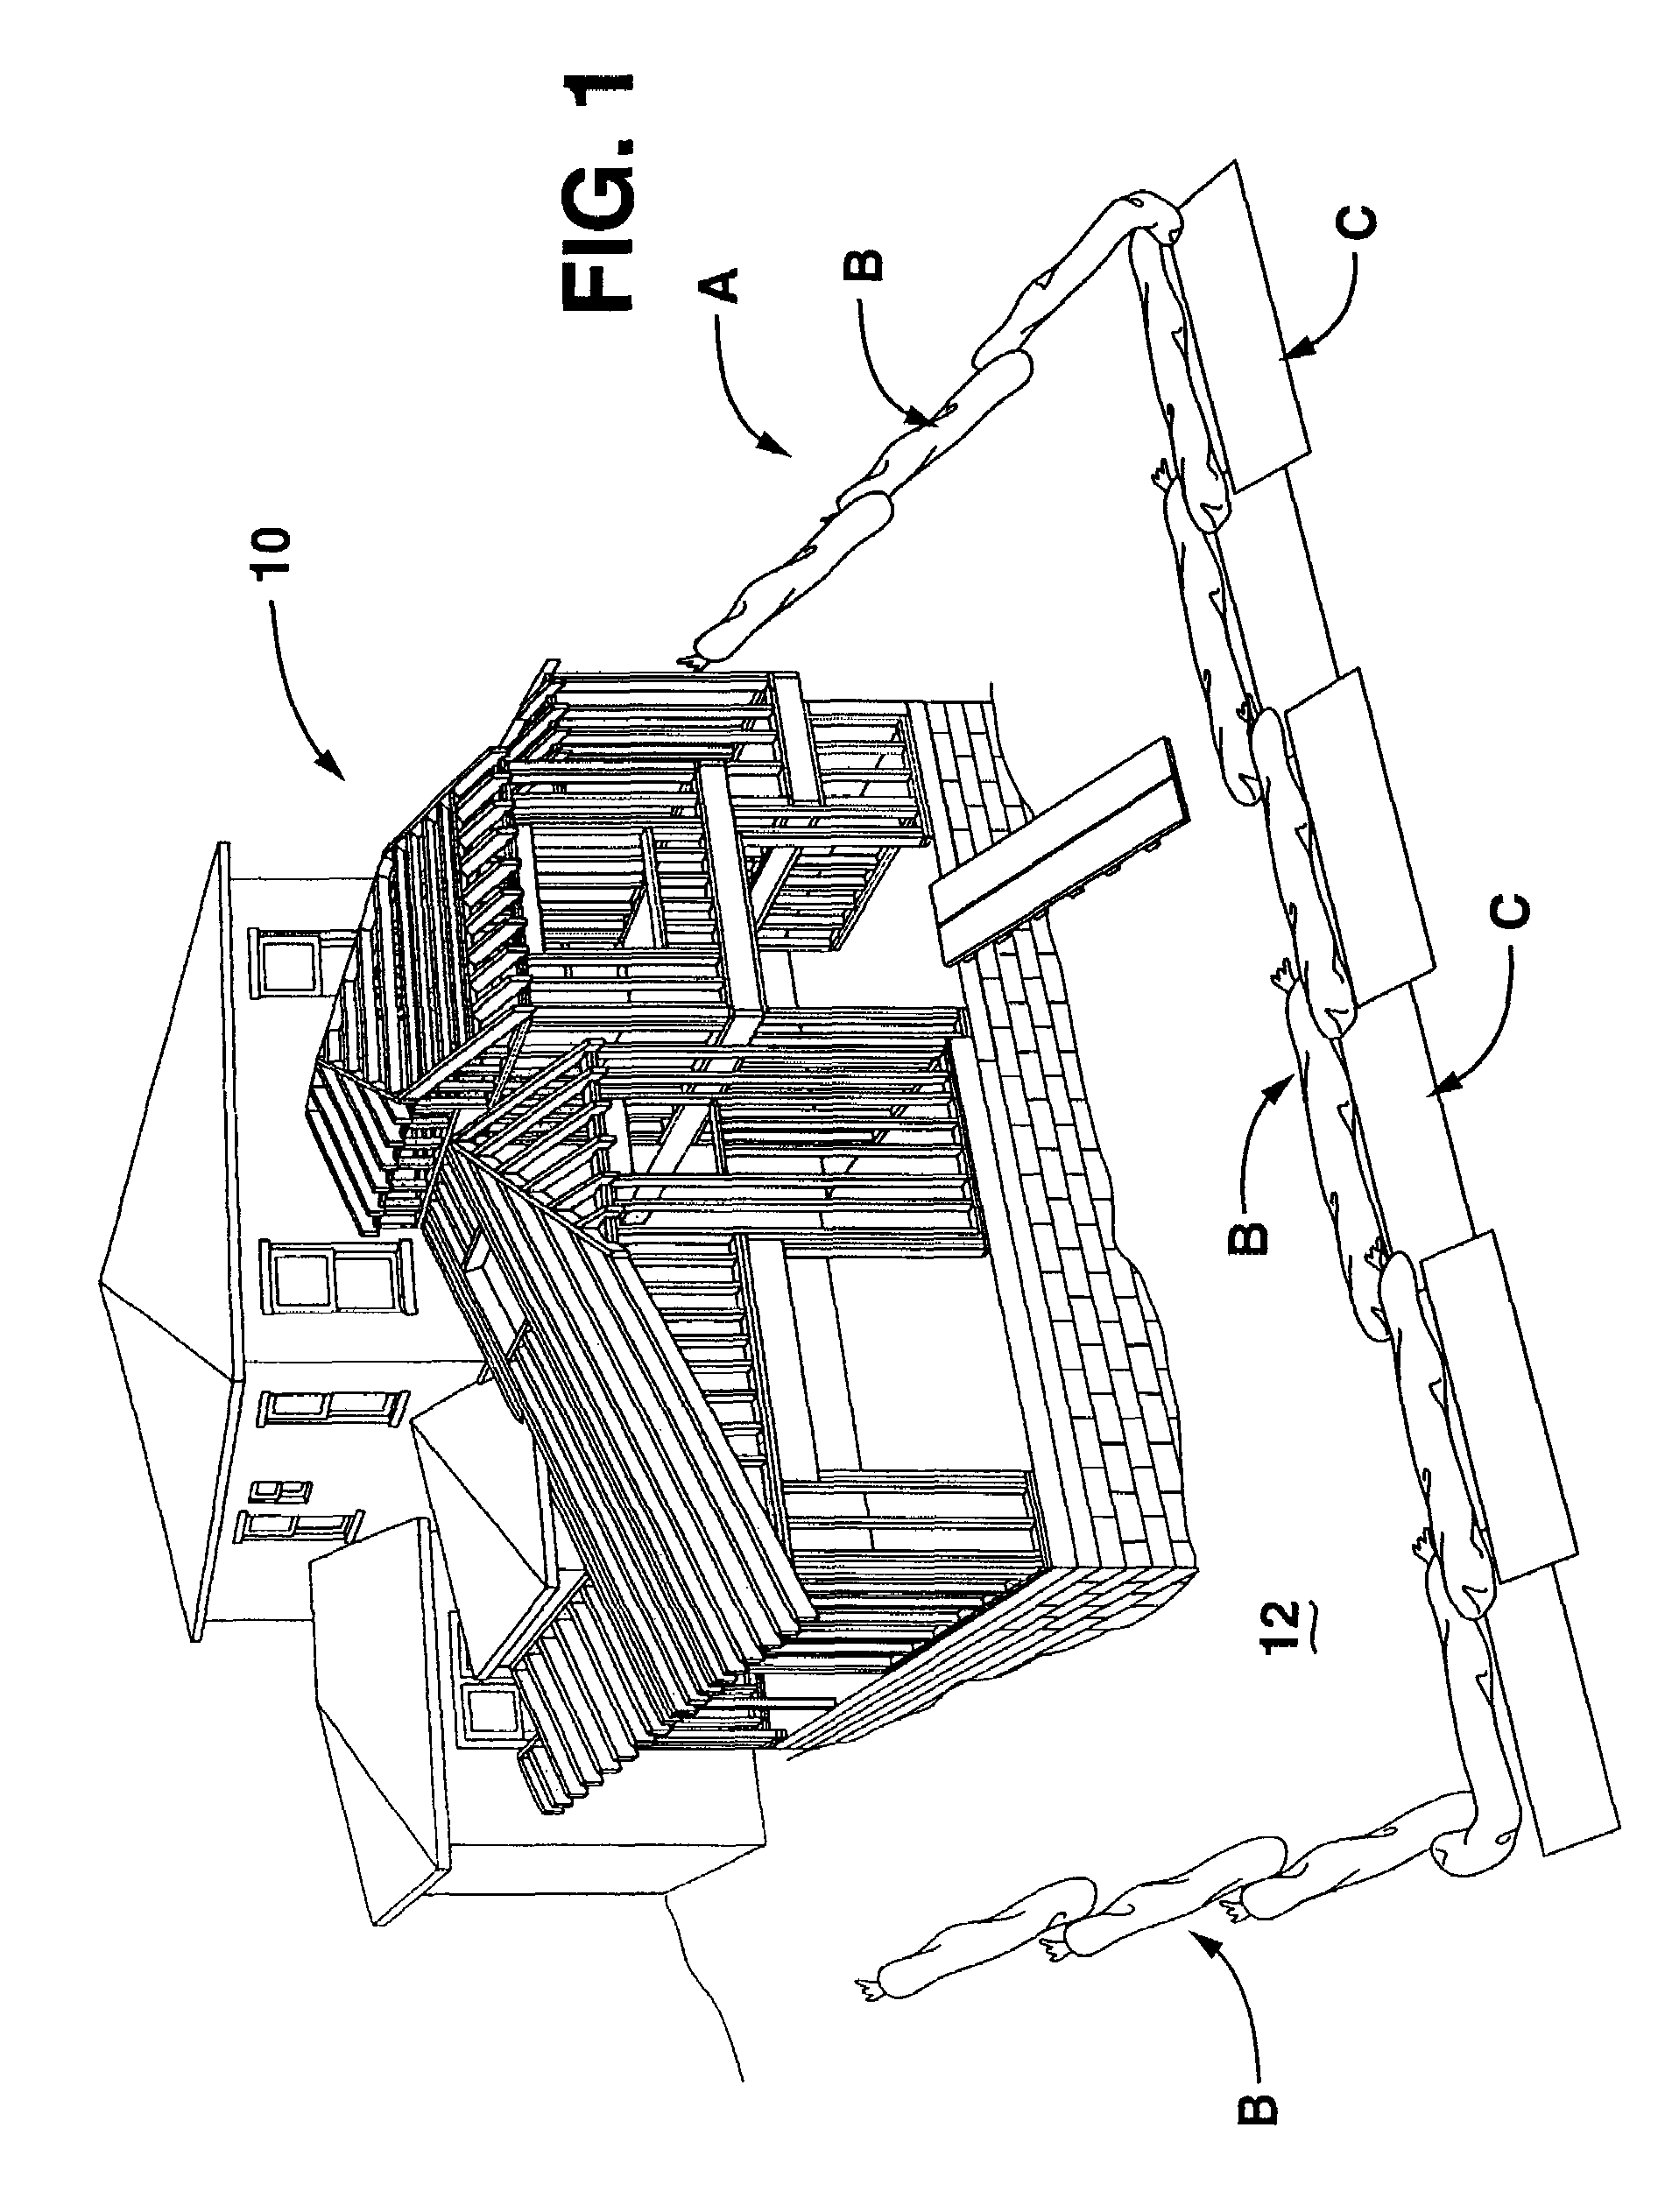 Water filtration and erosion control system